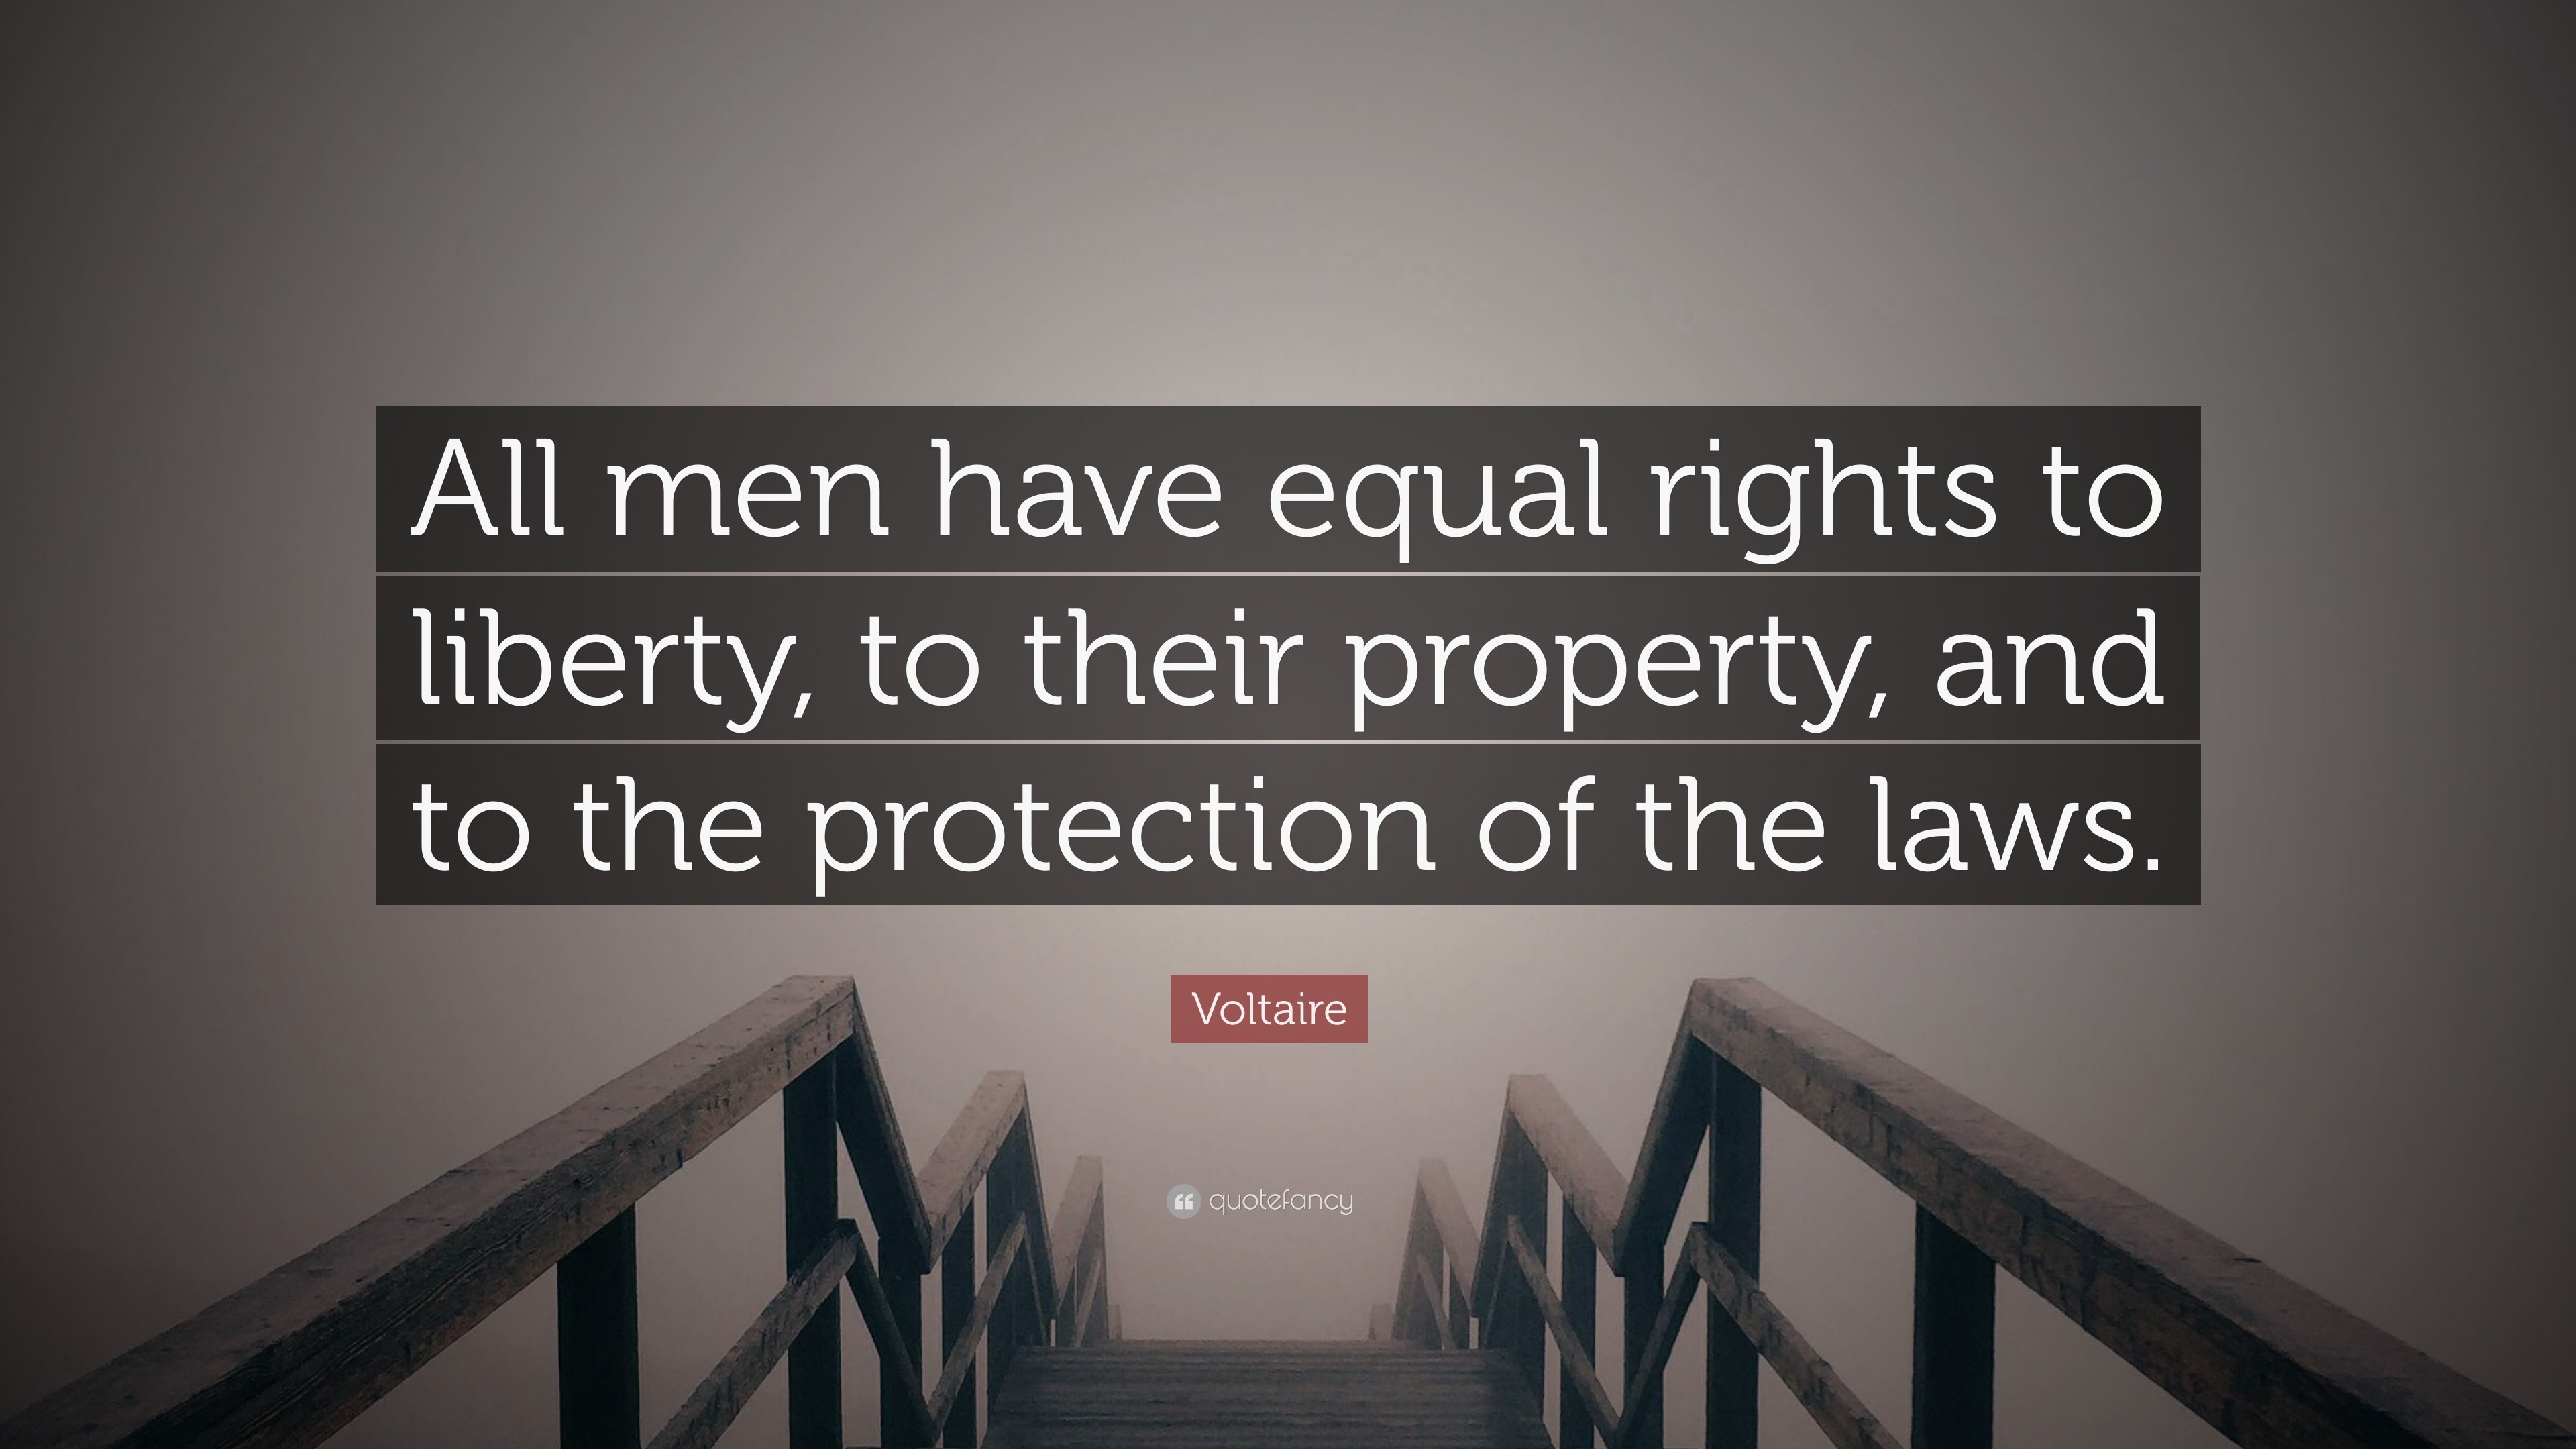 Voltaire Quote: “All men equal rights to liberty, their property, and to the protection